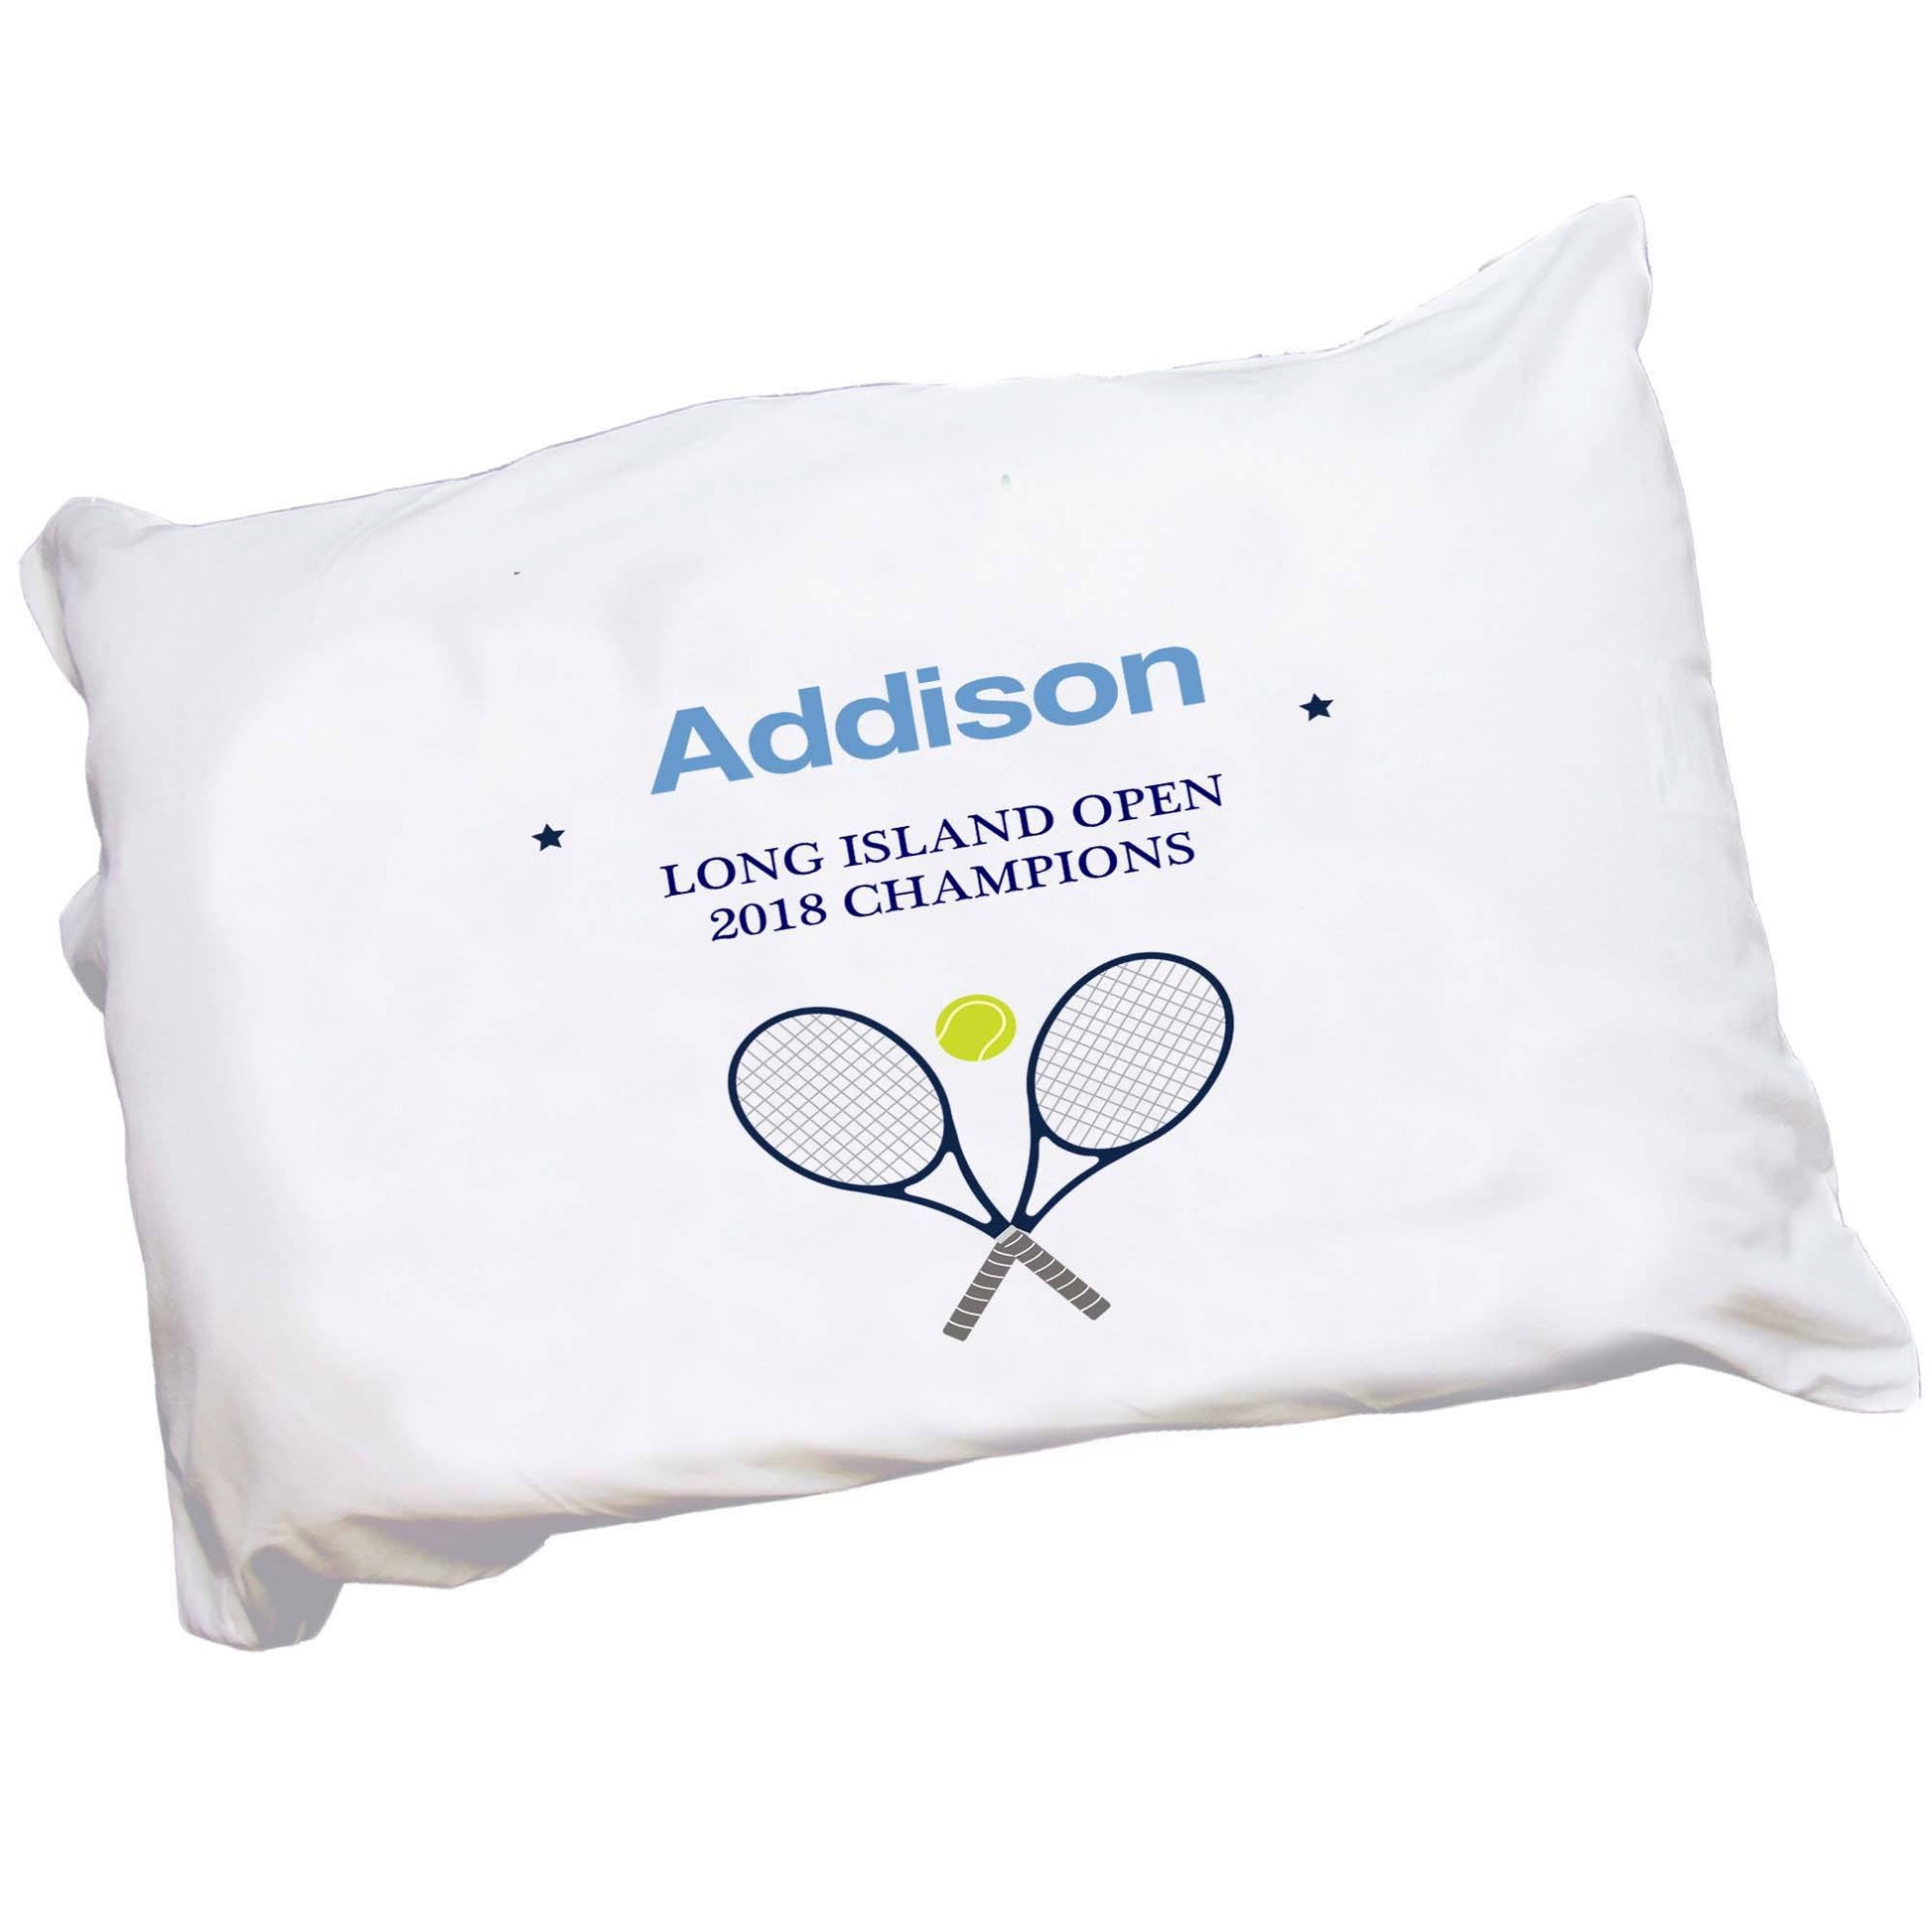 Personalized Pillowcase with Tennis 